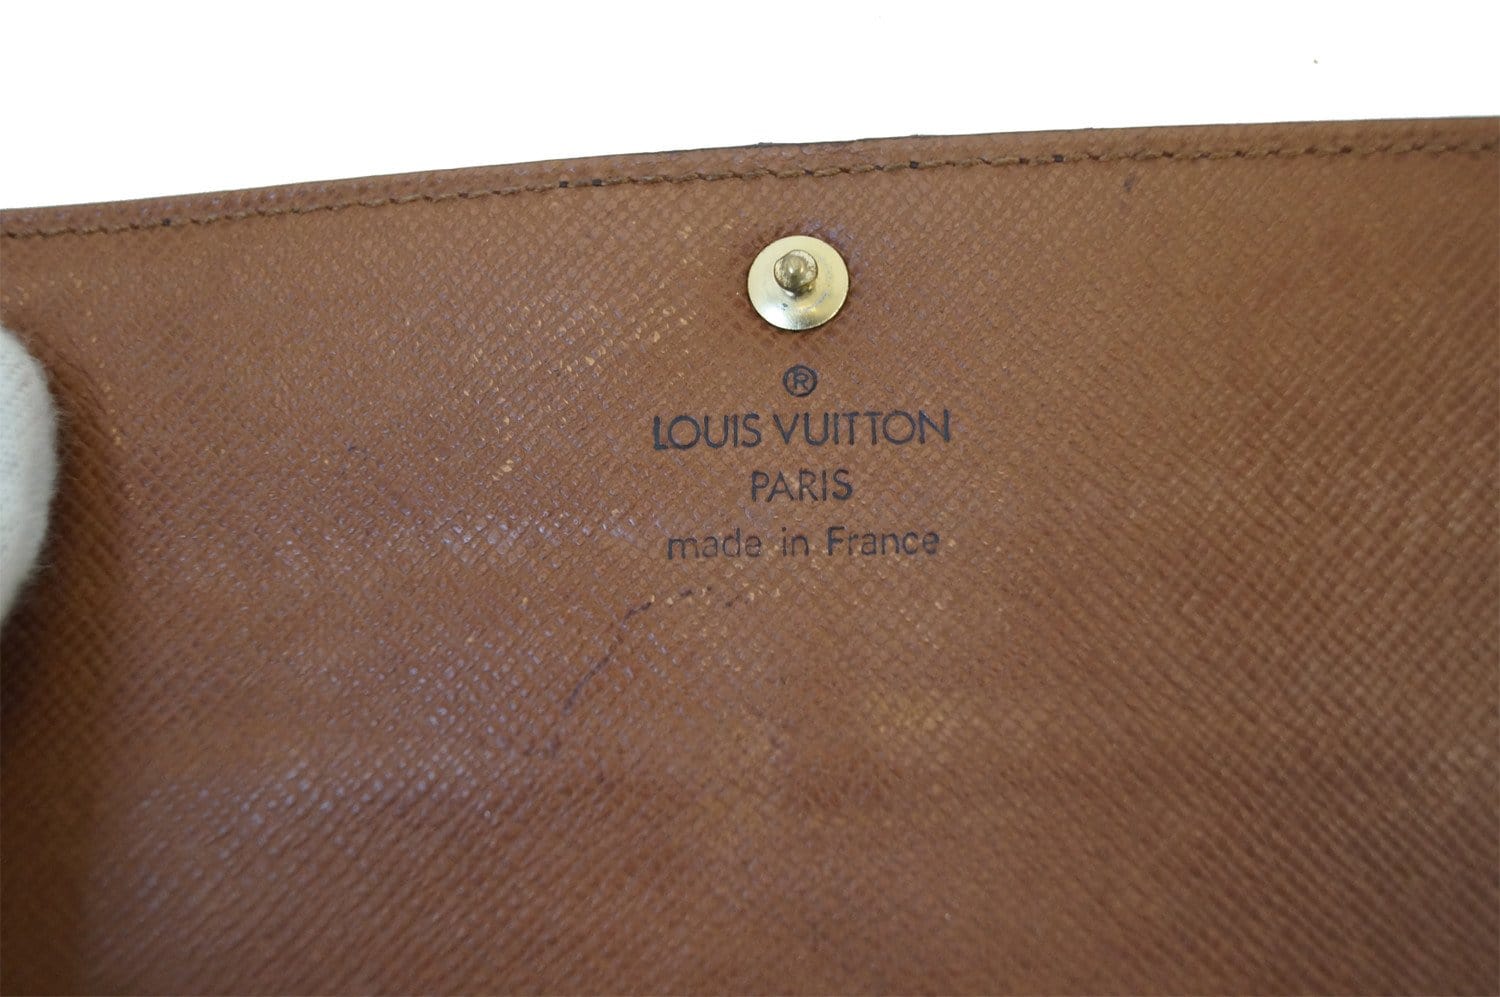 100% Authentic Louis Vuitton Bifold Wallet Made In France